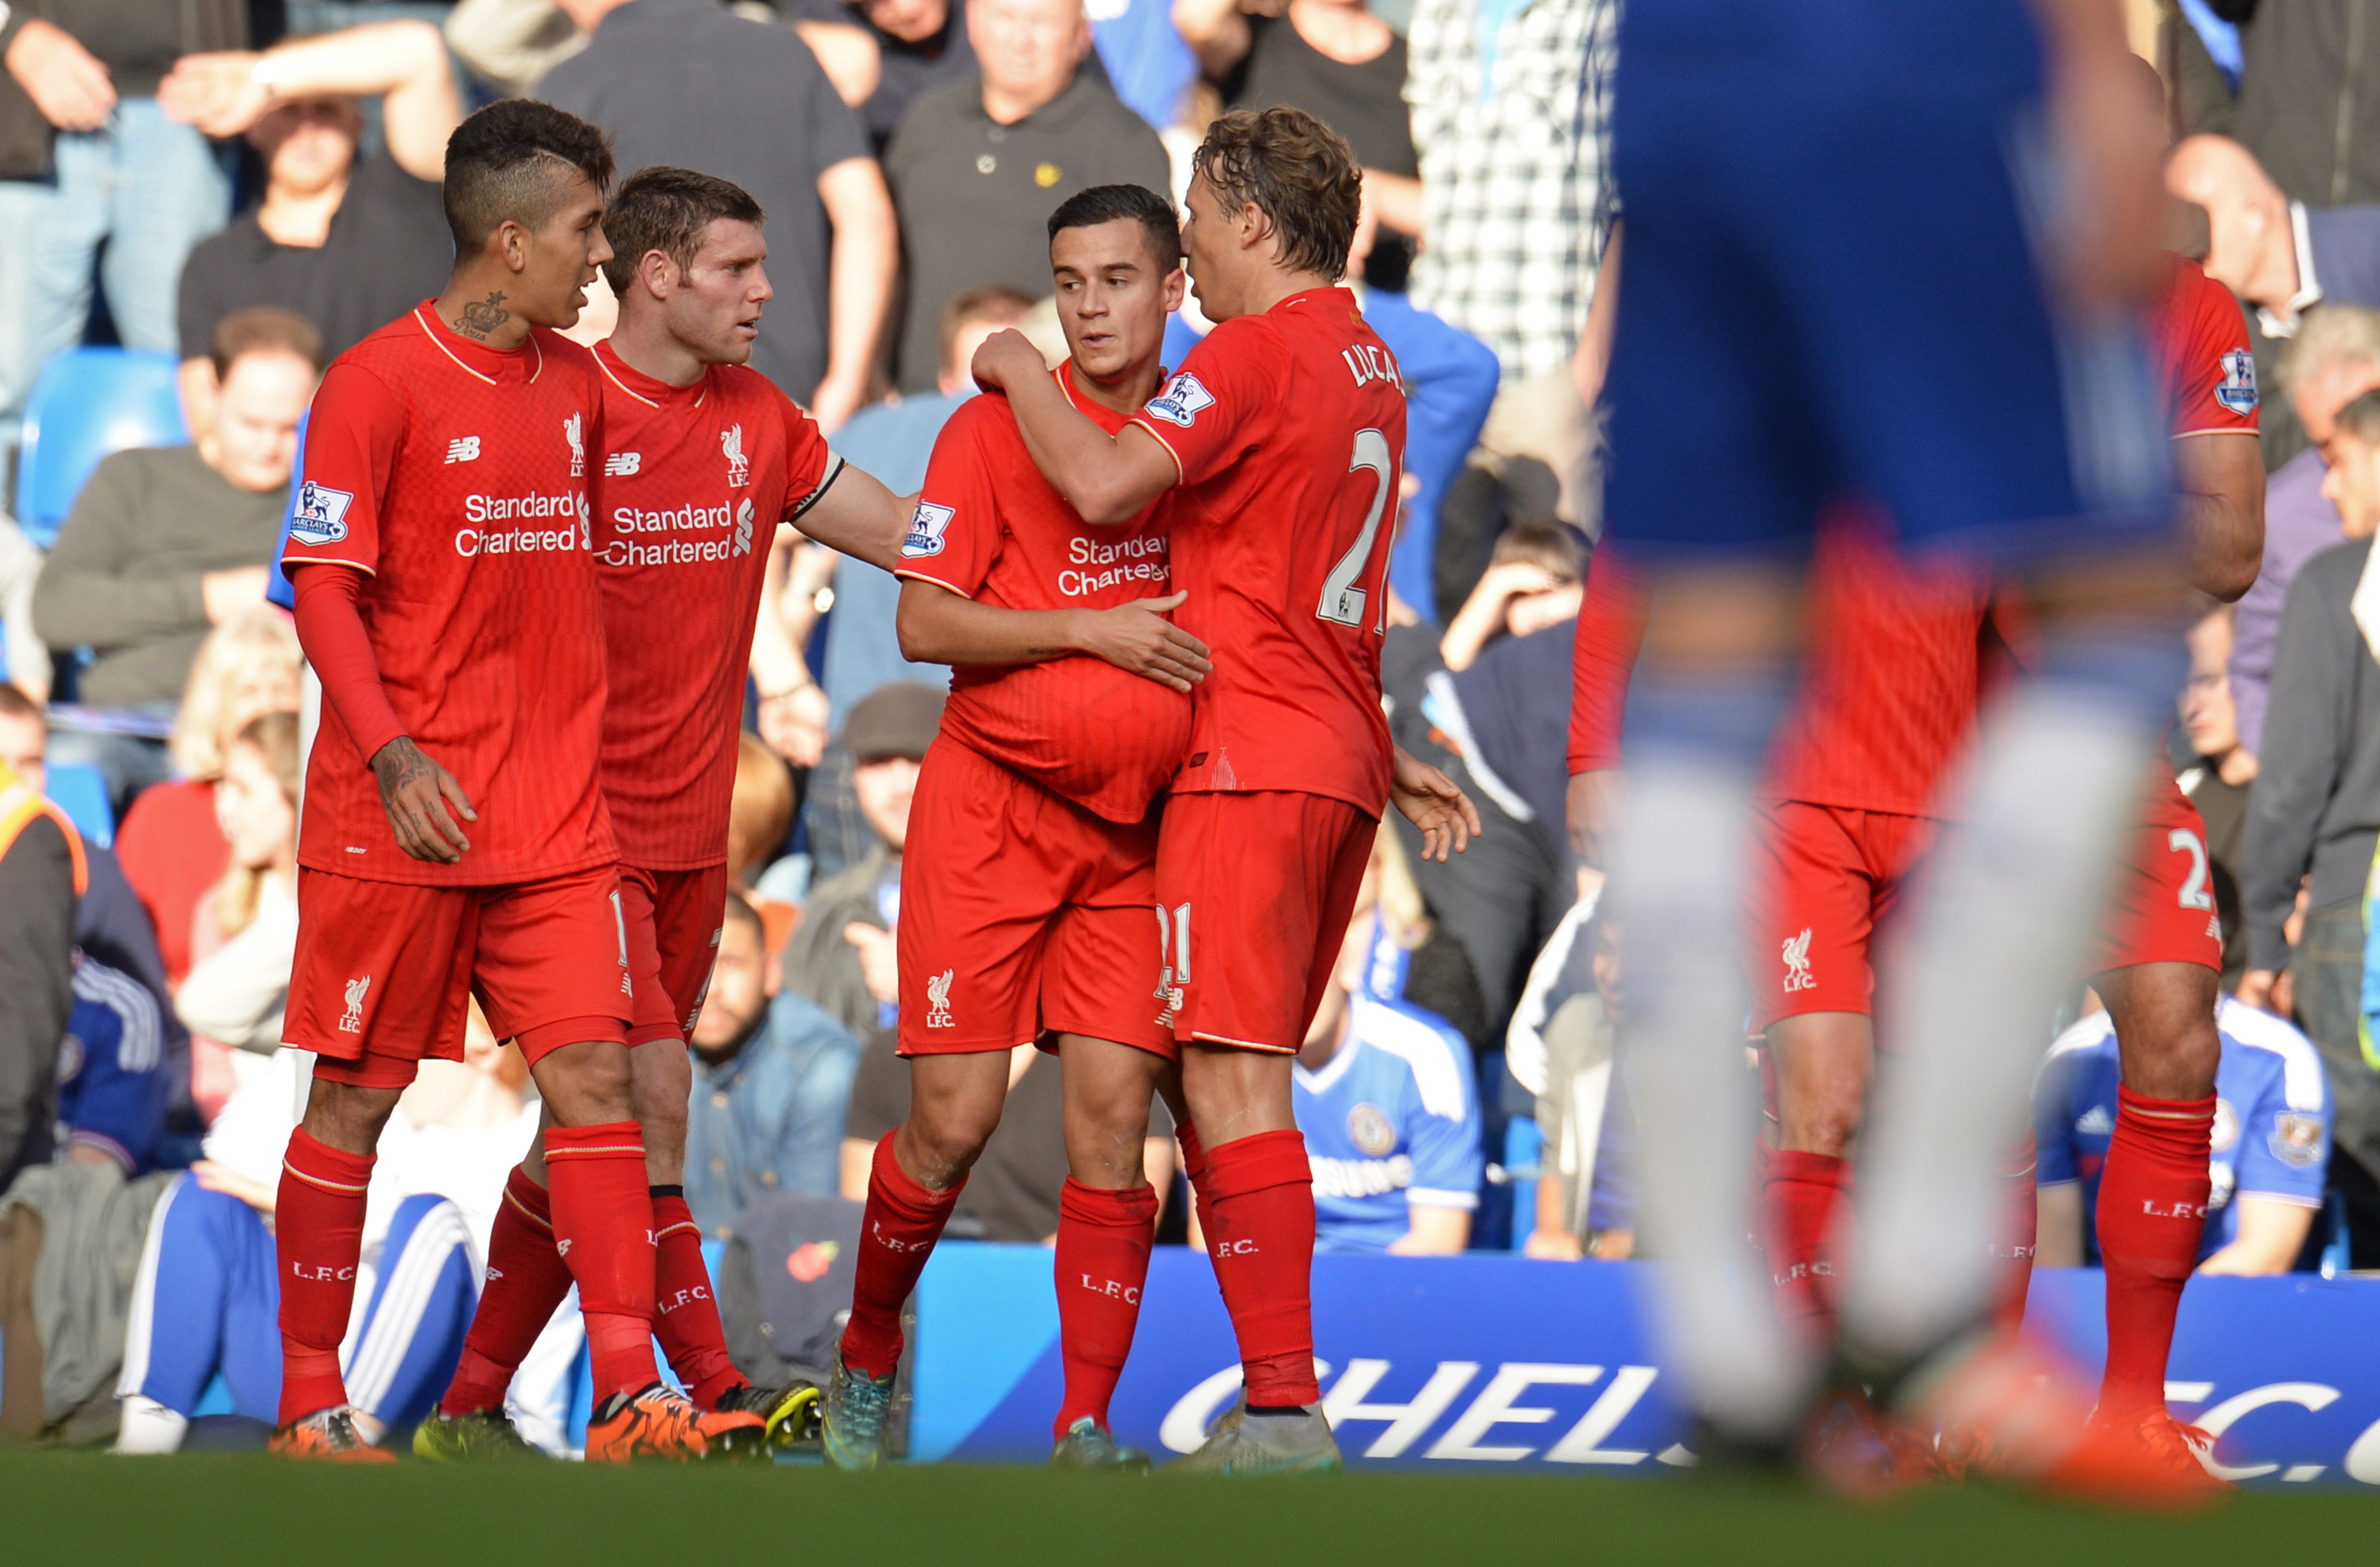 Philippe Coutinho celebrates with team mates after scoring the first goal for Liverpool. Photo: Reuters